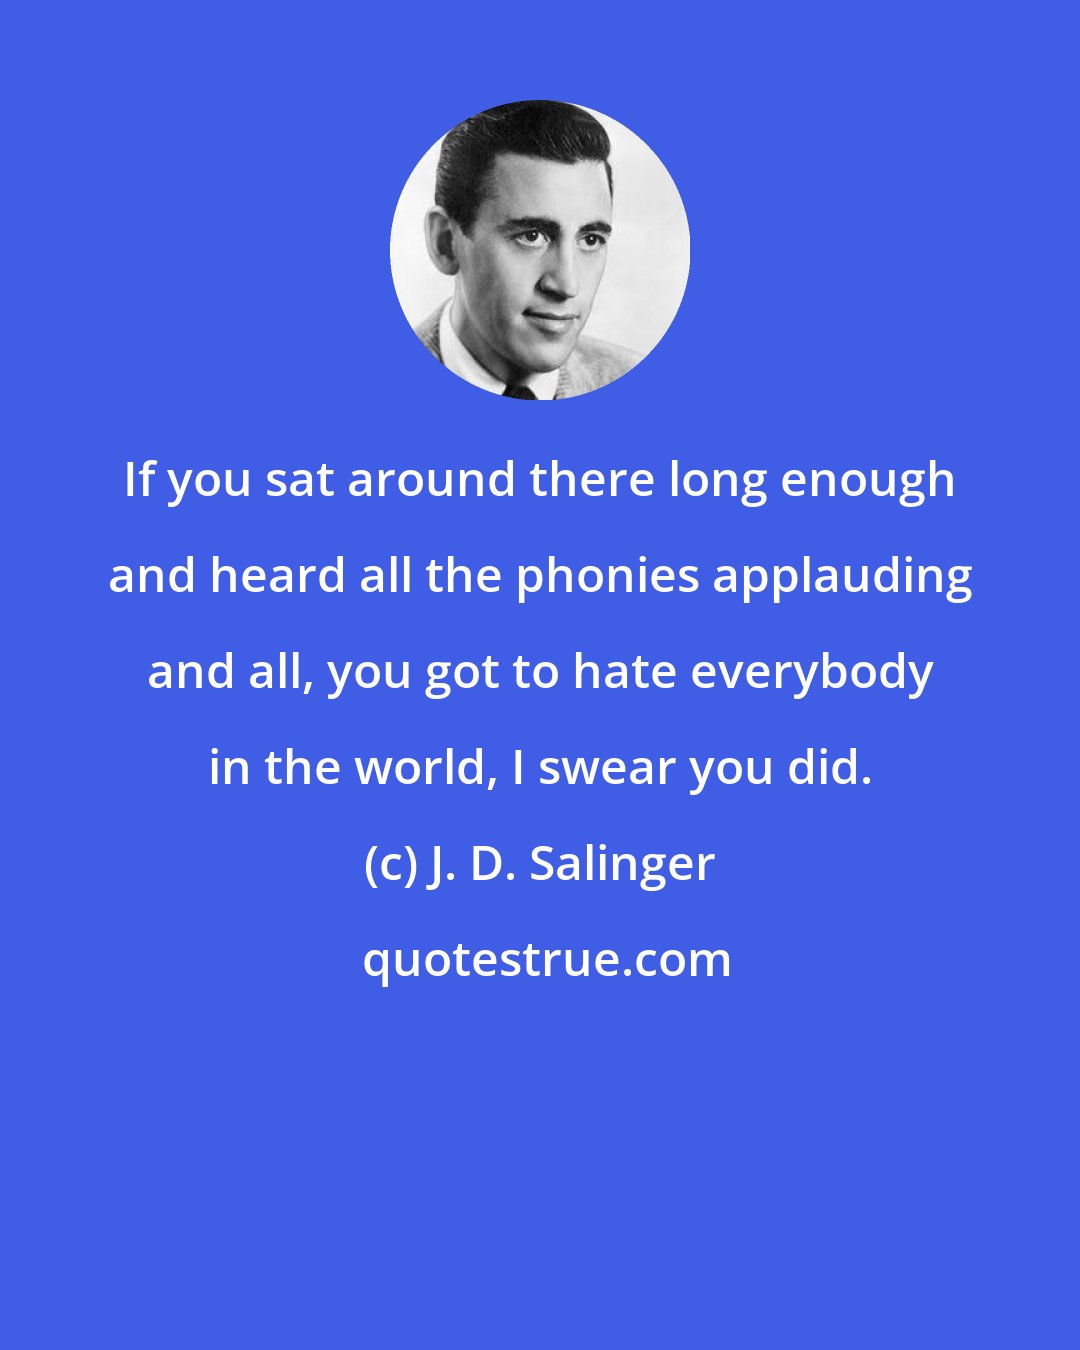 J. D. Salinger: If you sat around there long enough and heard all the phonies applauding and all, you got to hate everybody in the world, I swear you did.